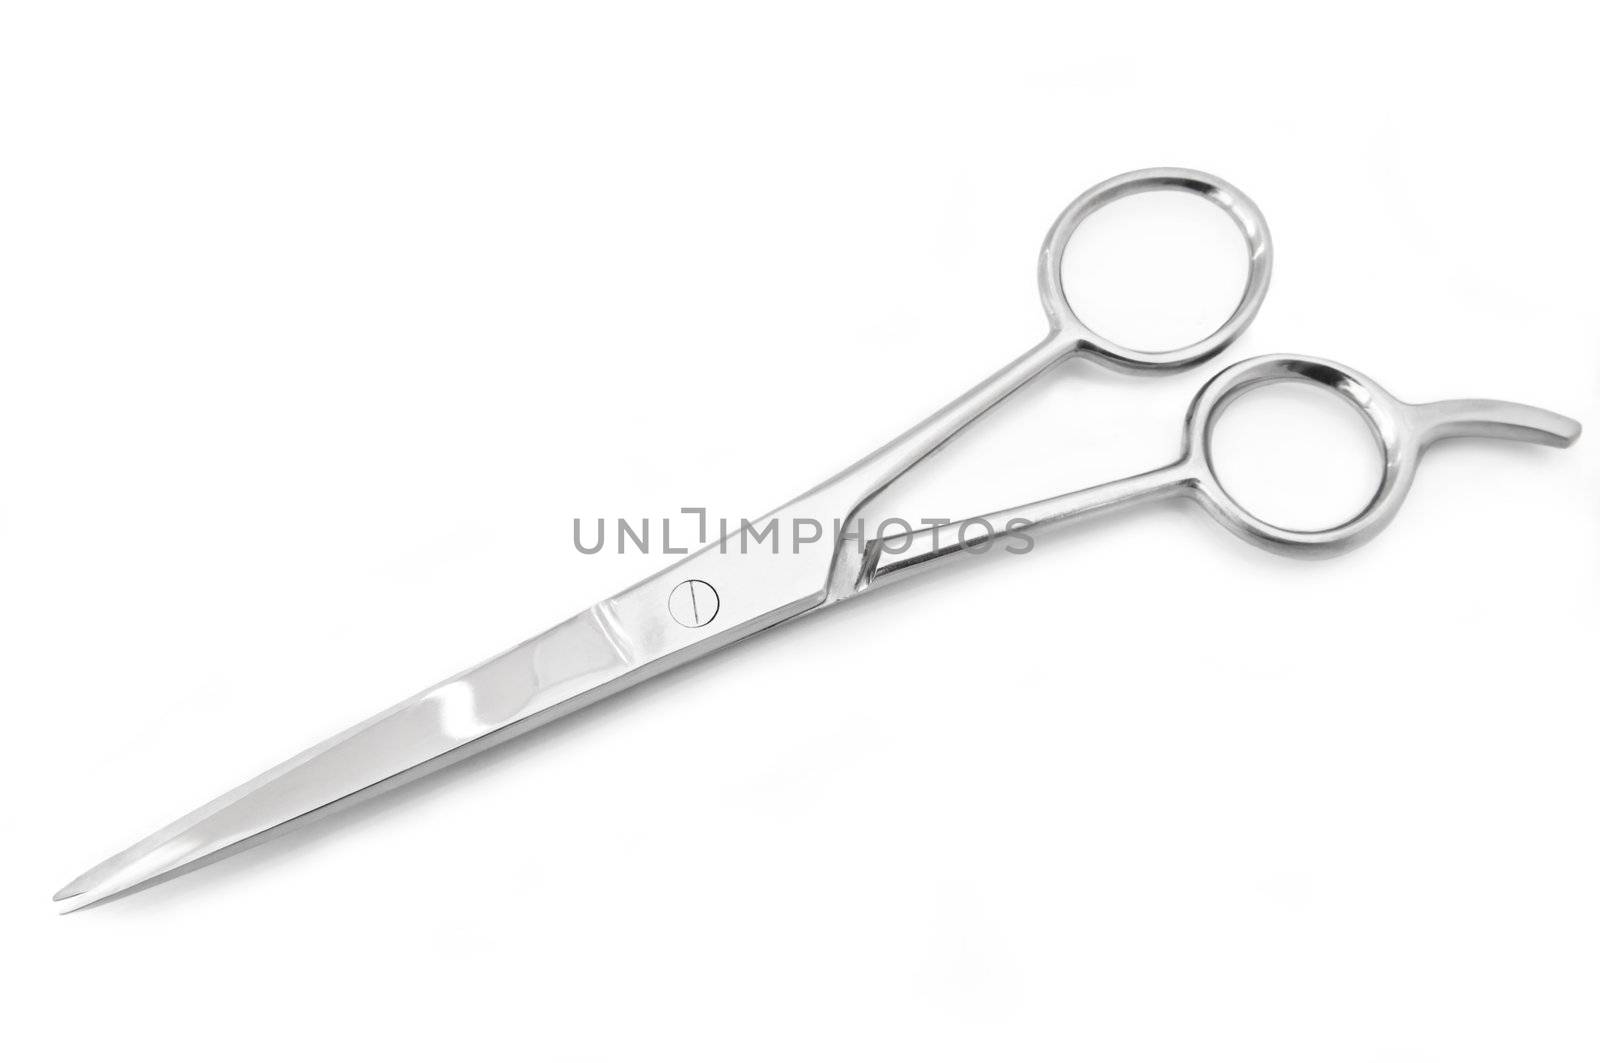 Hairdressing scissors by 72soul